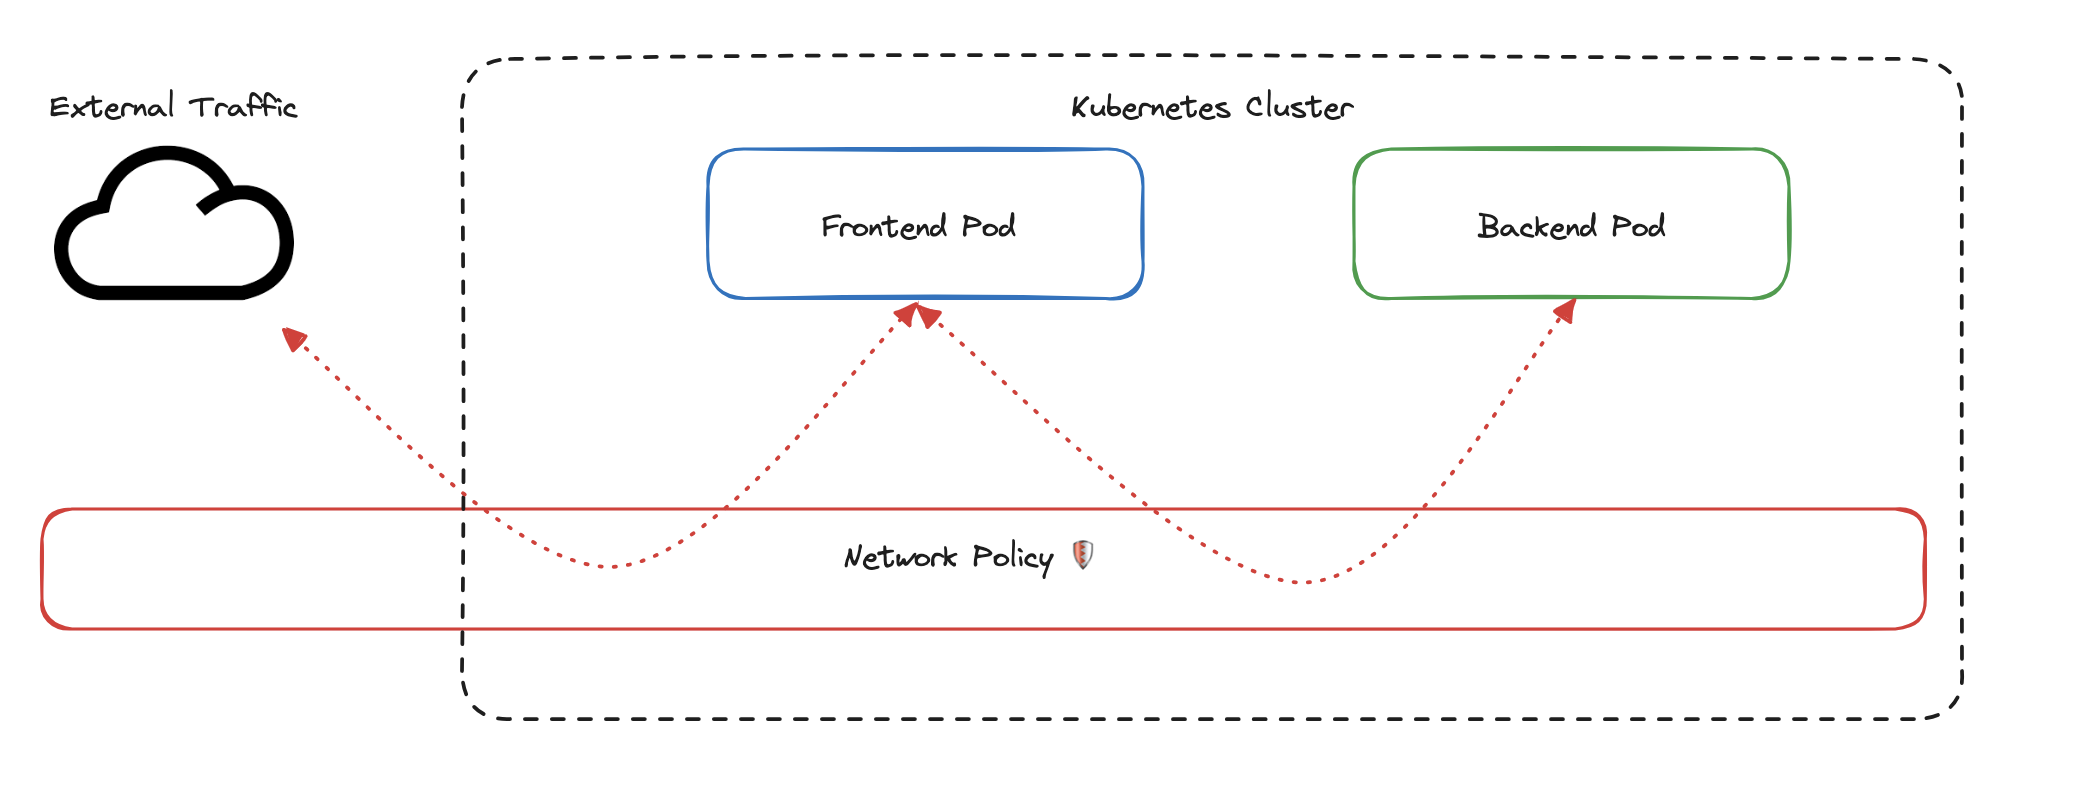 Diagram showing how Kubernetes network policies regulate traffic between front-end and back-end pods within a cluster